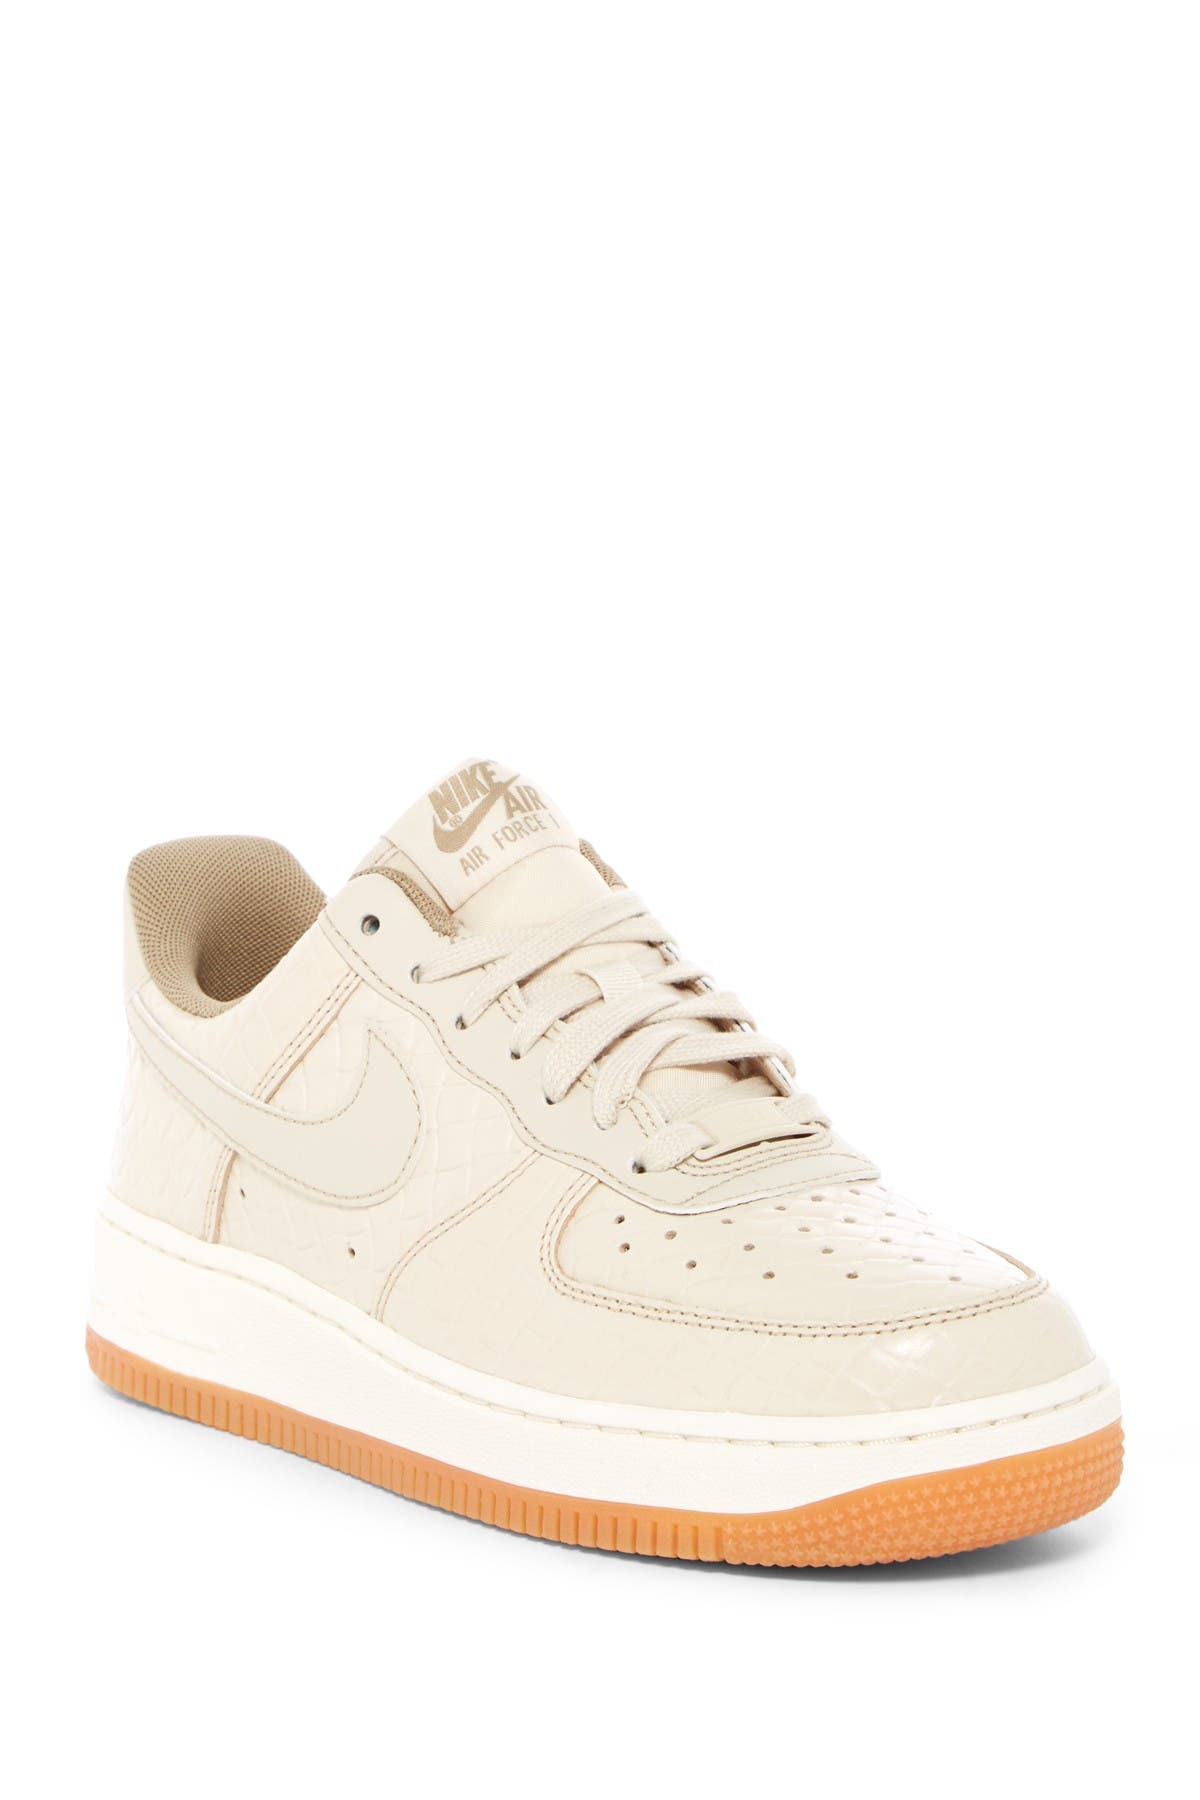 nordstrom air force ones